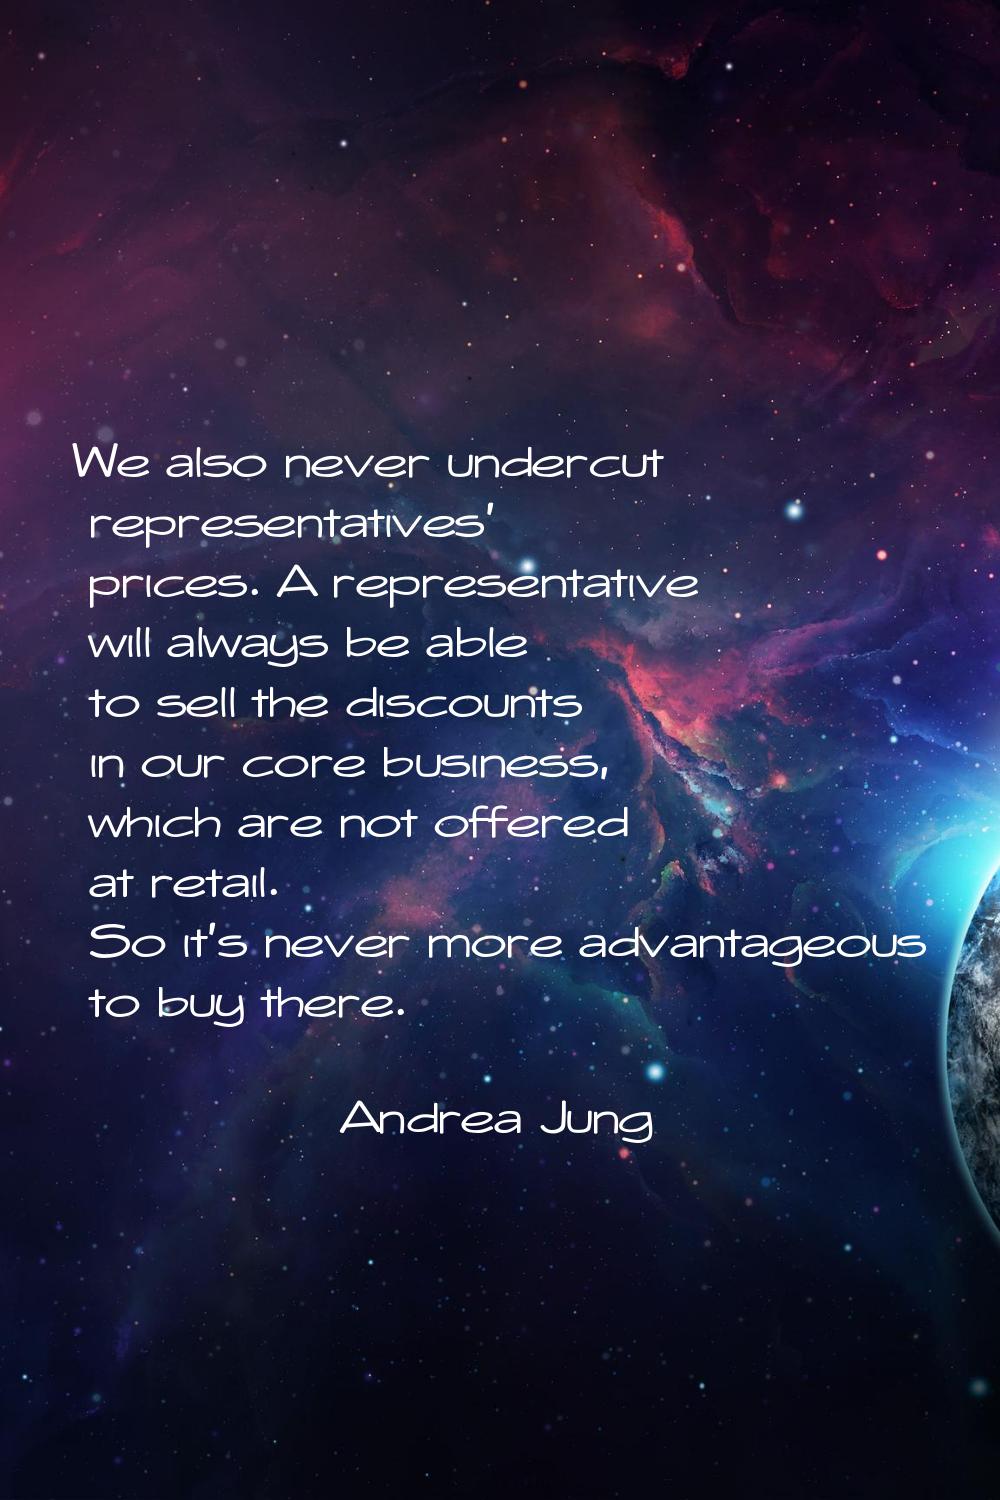 We also never undercut representatives' prices. A representative will always be able to sell the di